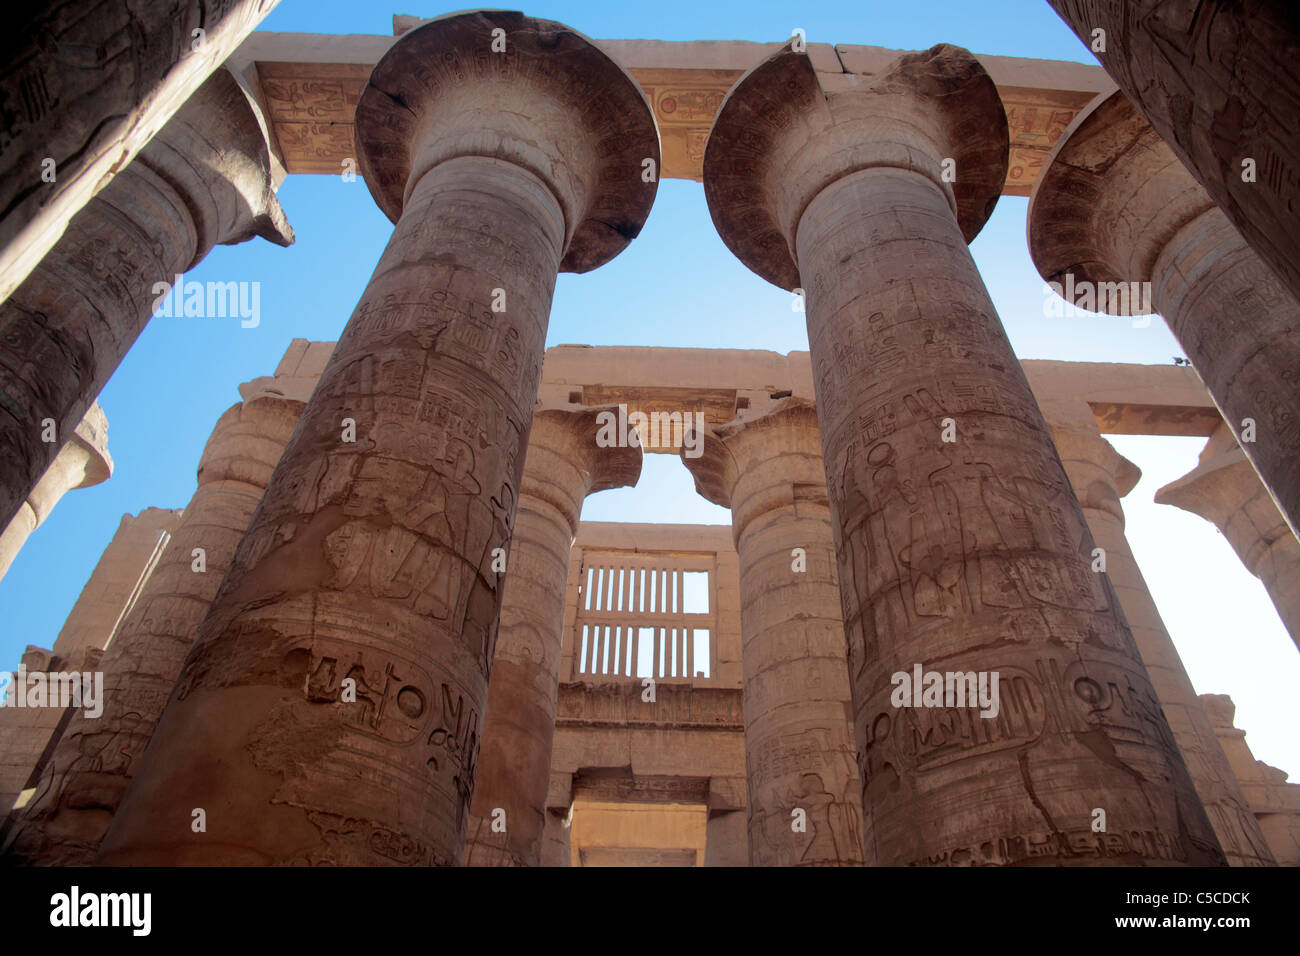 Great Hypostyle Hall (1280s-1260s BC), Luxor, Egypt Stock Photo